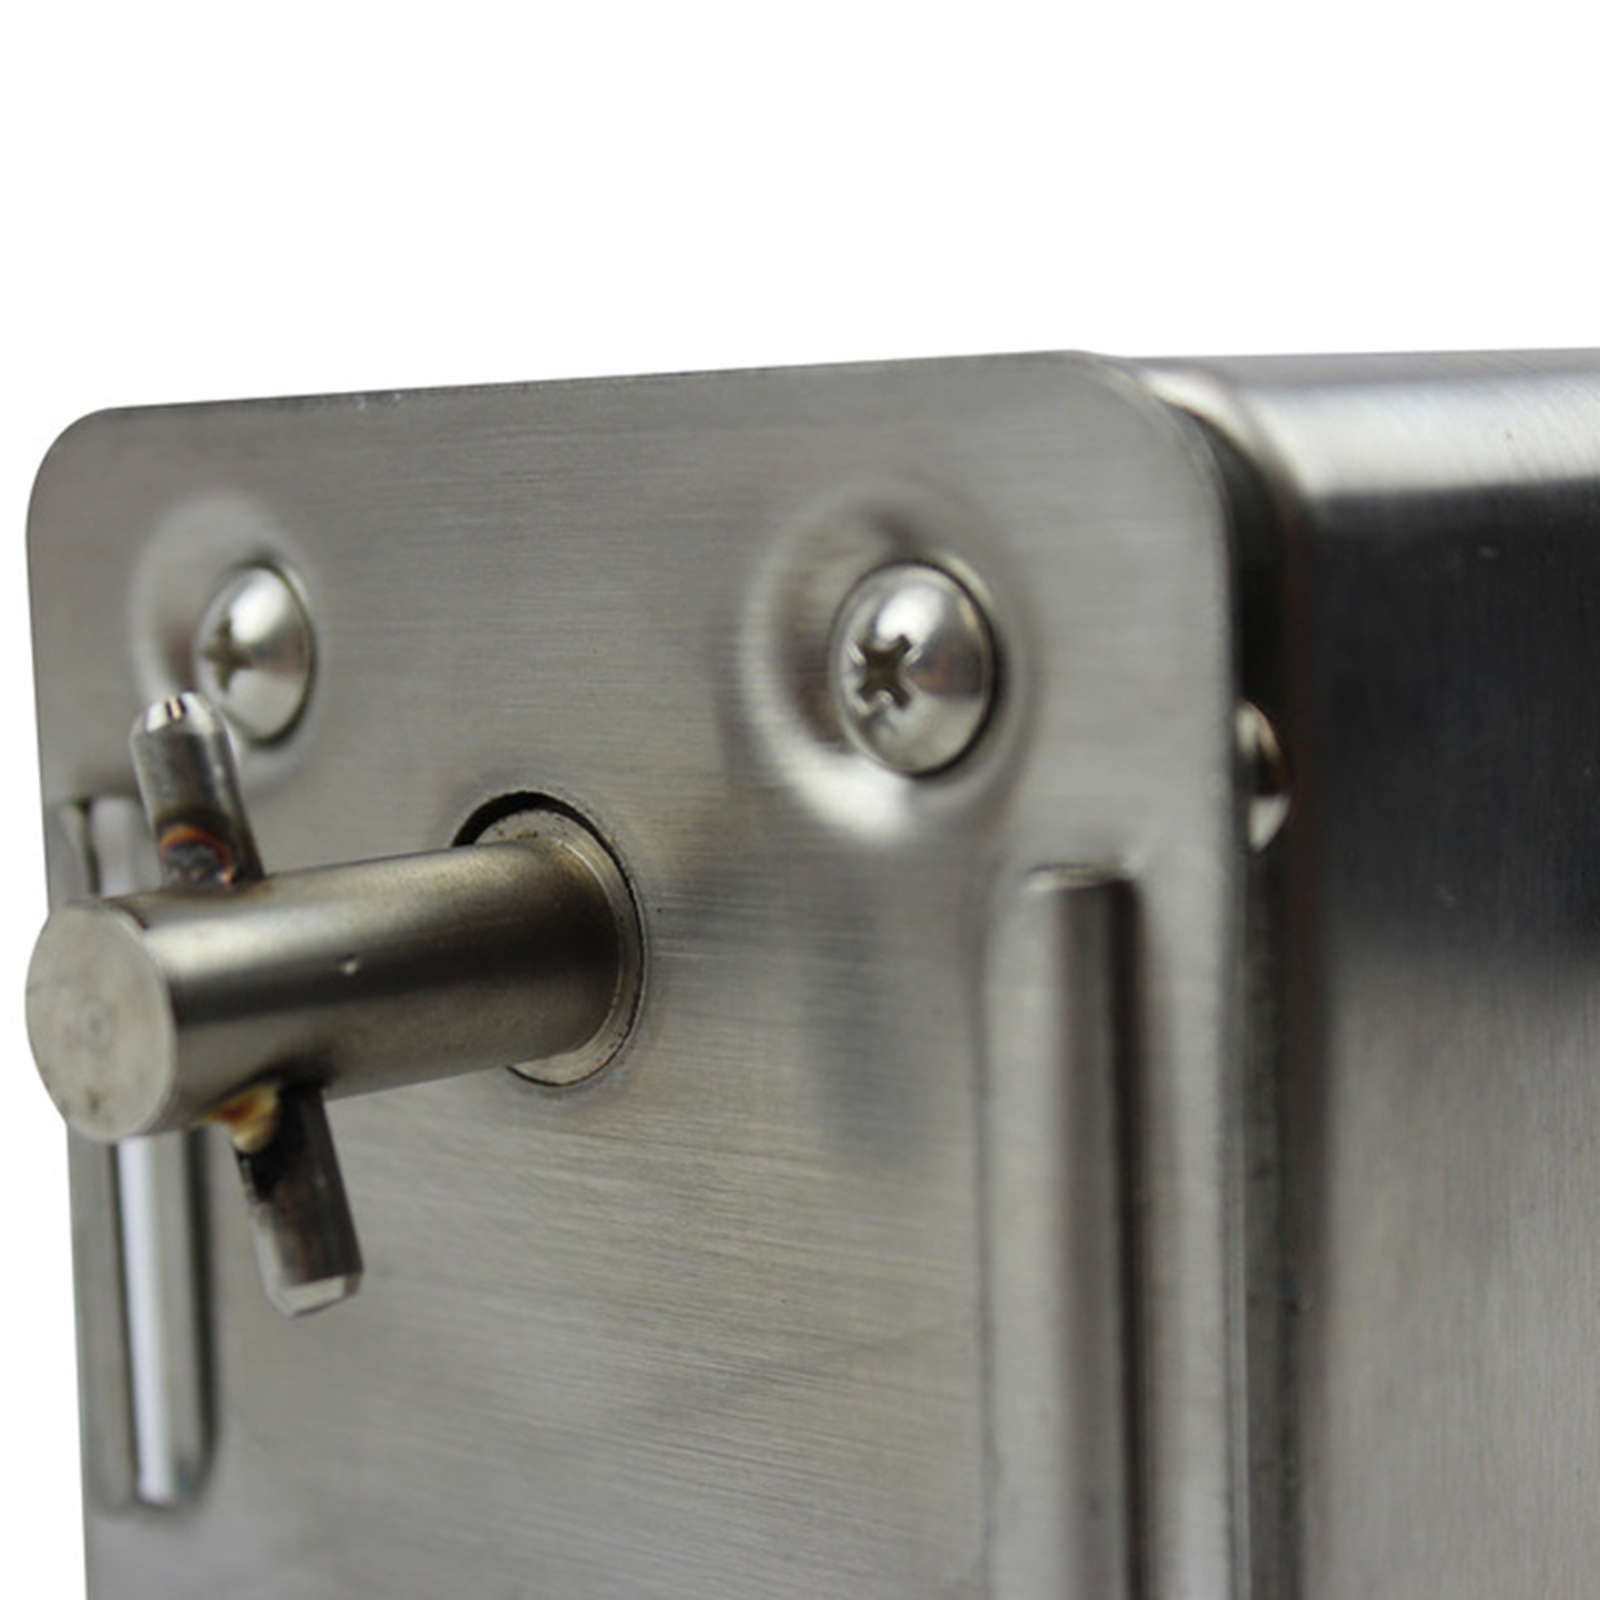 A40 Stainless Steel Rotisserie BBQ Spit Motor with Pin (30kg Capacity) with Mounting Bracket from DIZZY LAMB